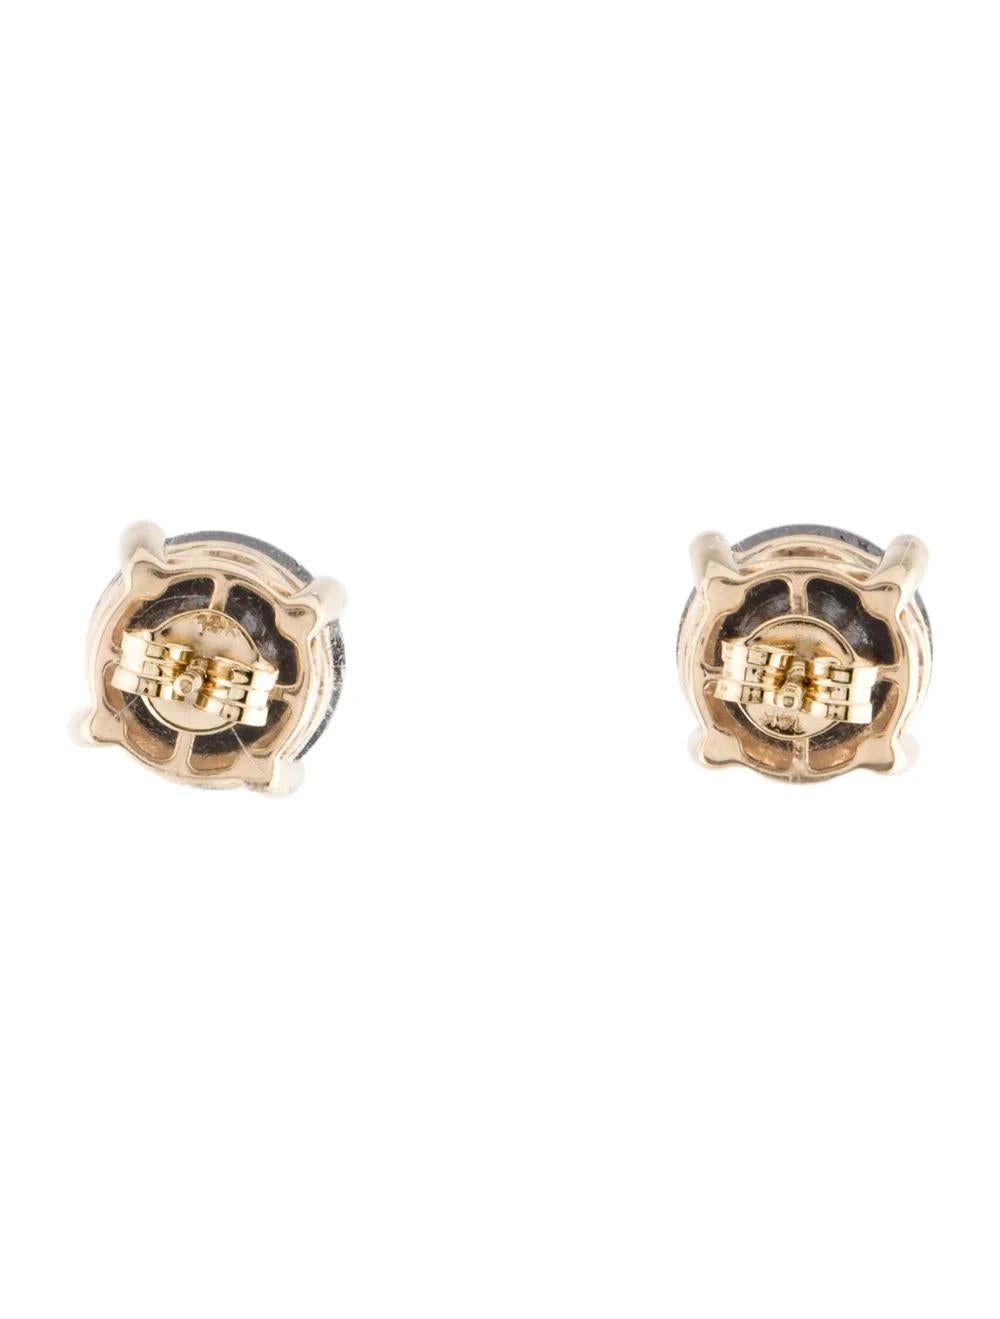 Round Cut 14K Yellow Gold 8.90ctw Diamond Stud Earrings - Classic Brilliance, Timeless  For Sale